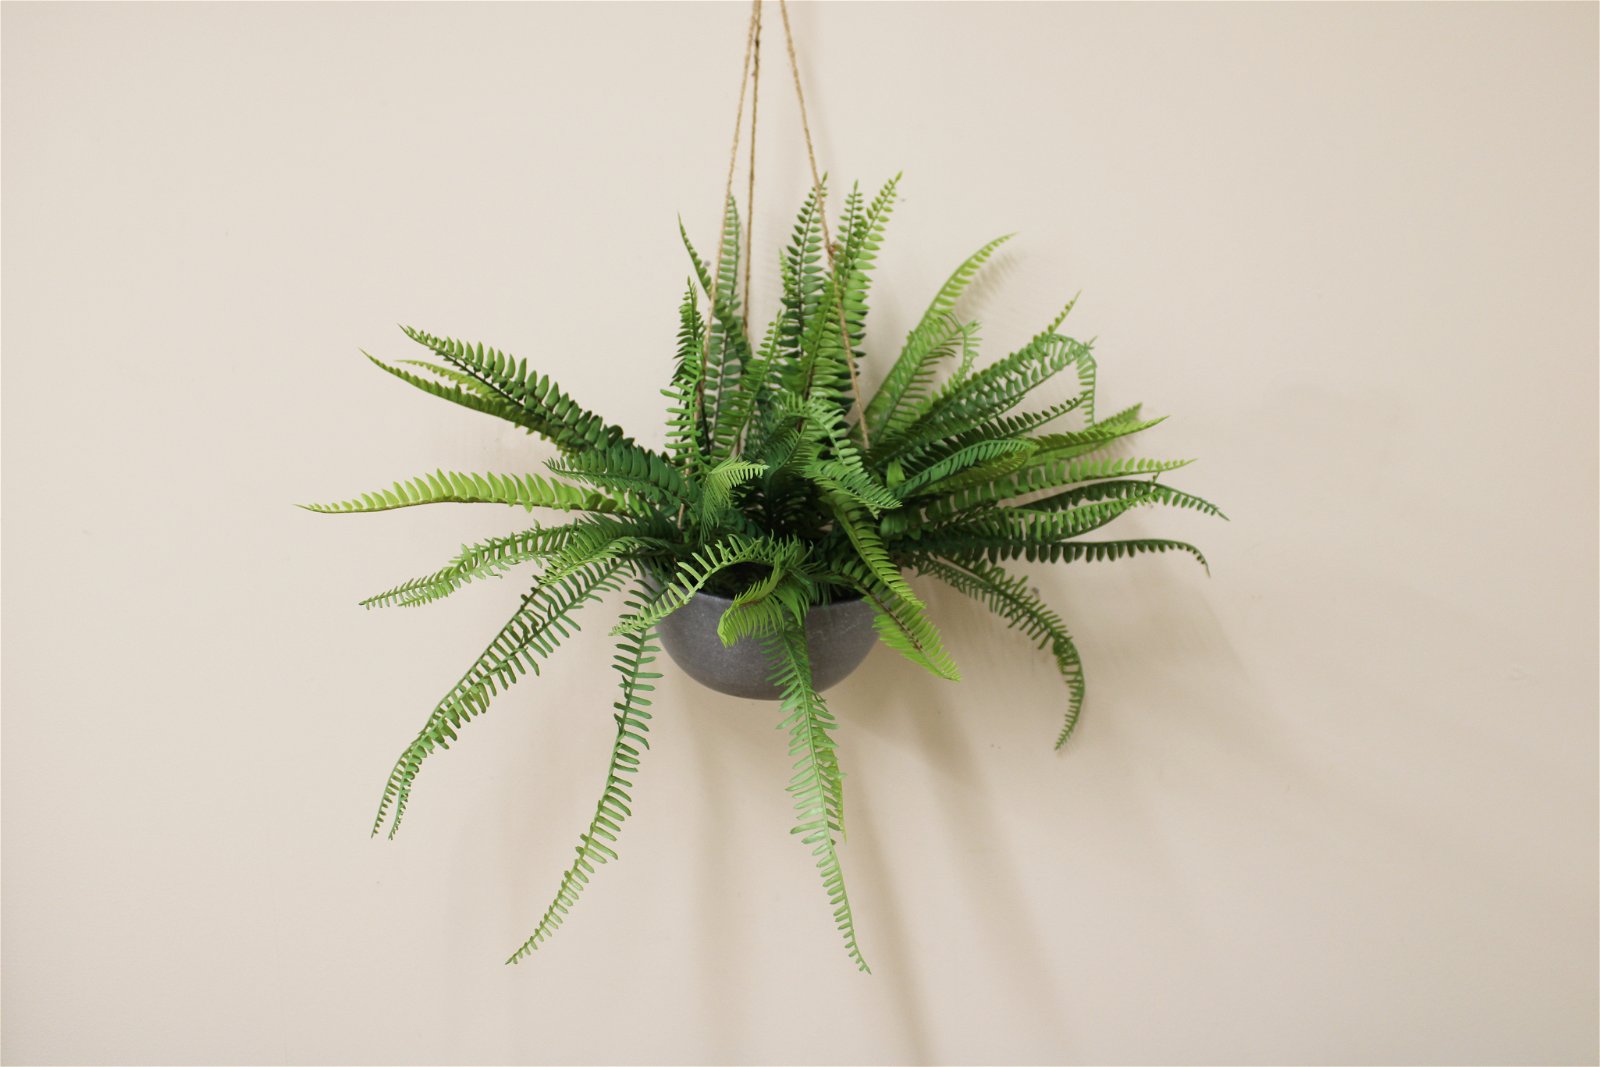 View Hanging Fern In Pot information